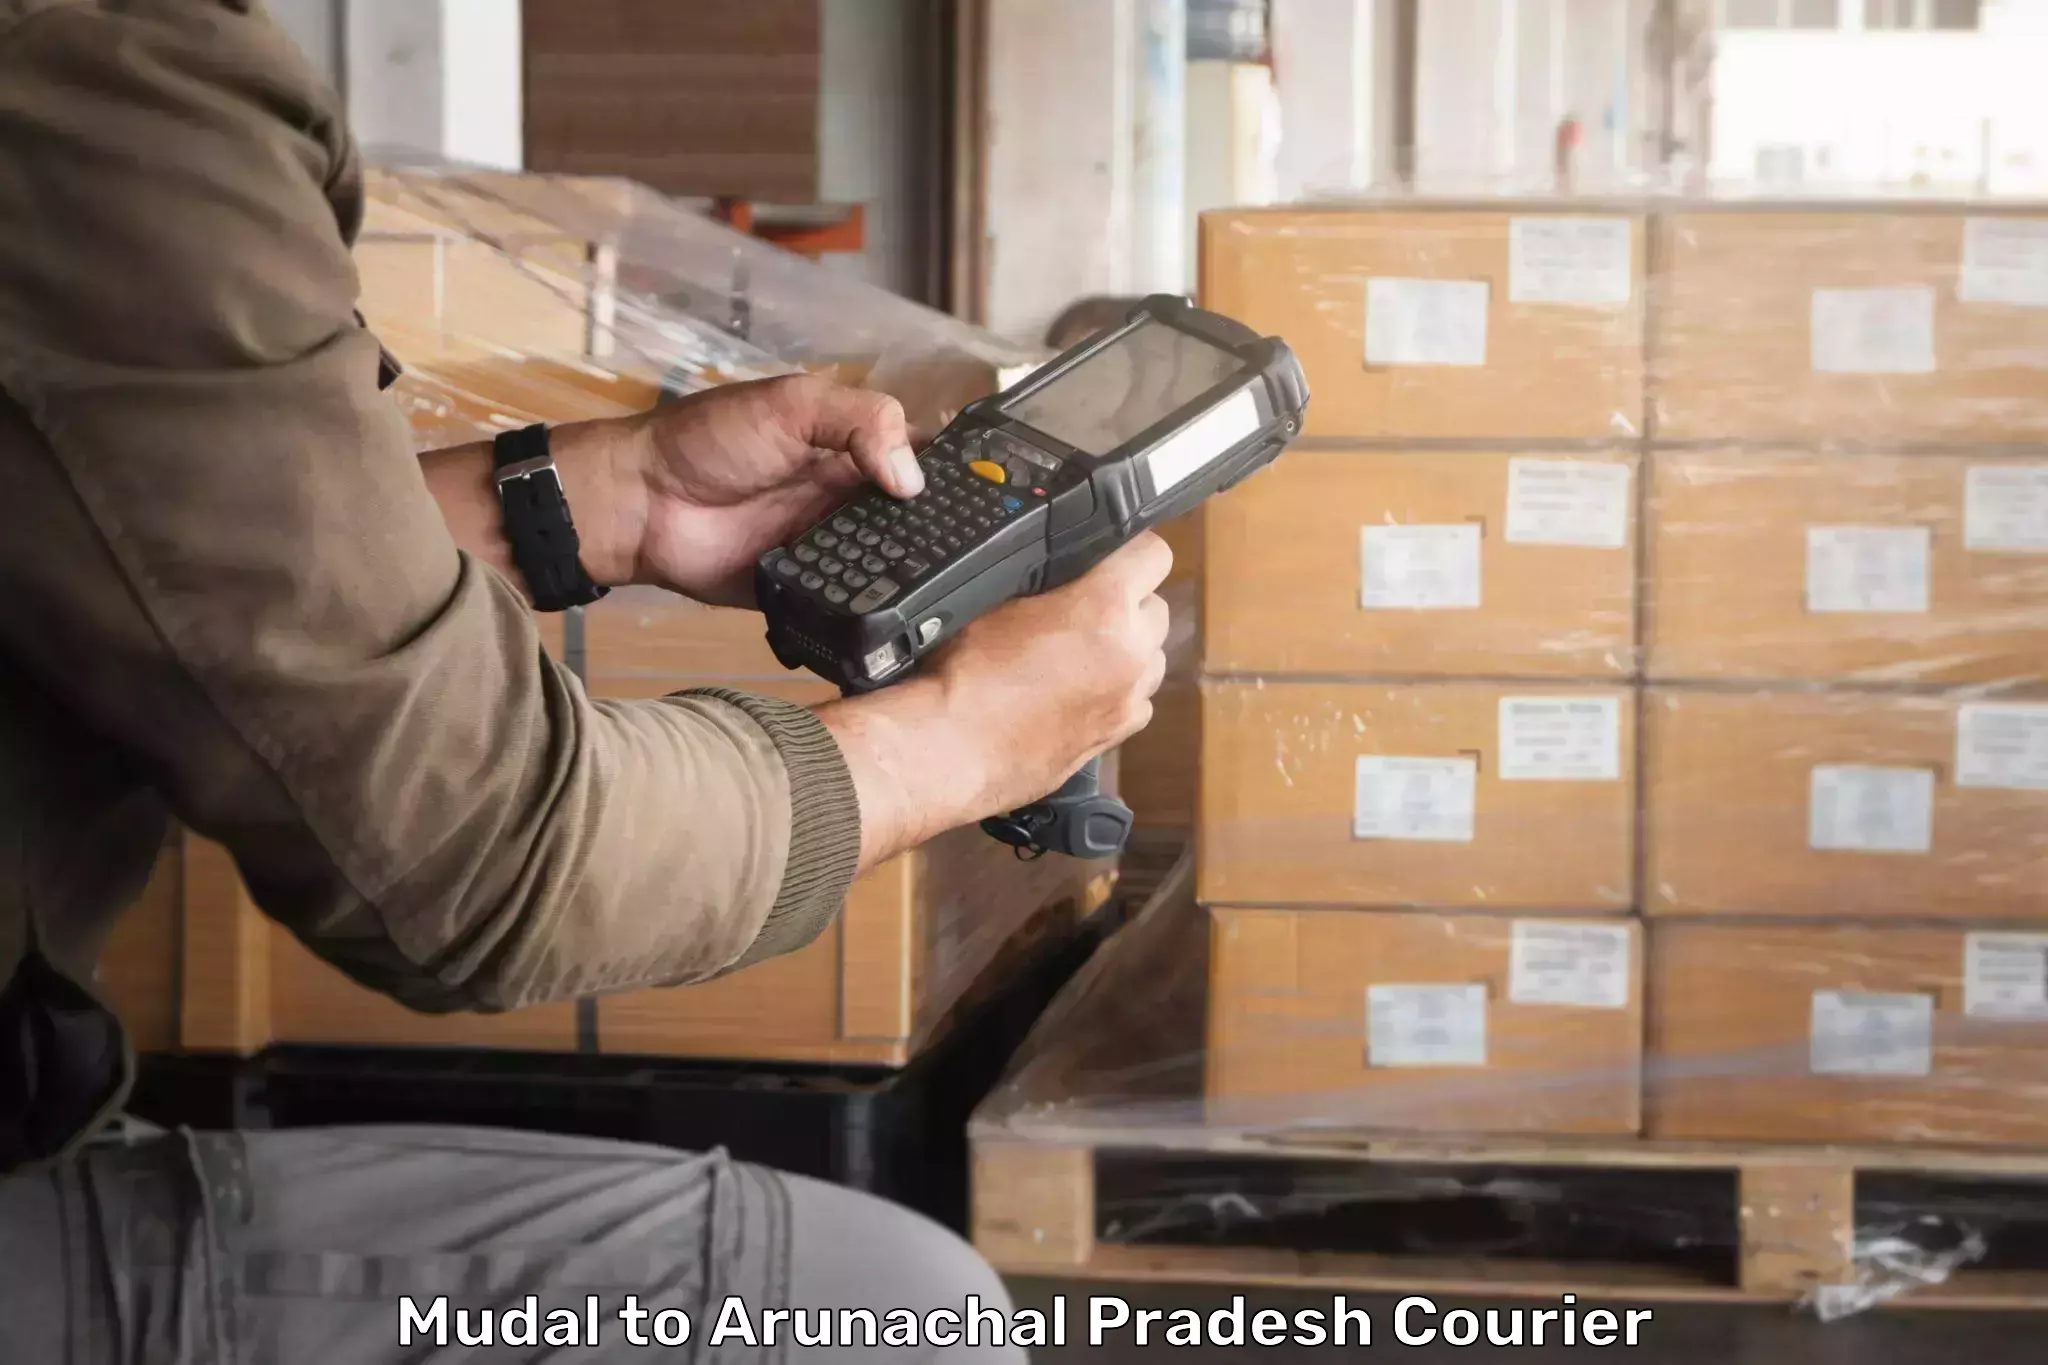 Courier service comparison Mudal to Aalo